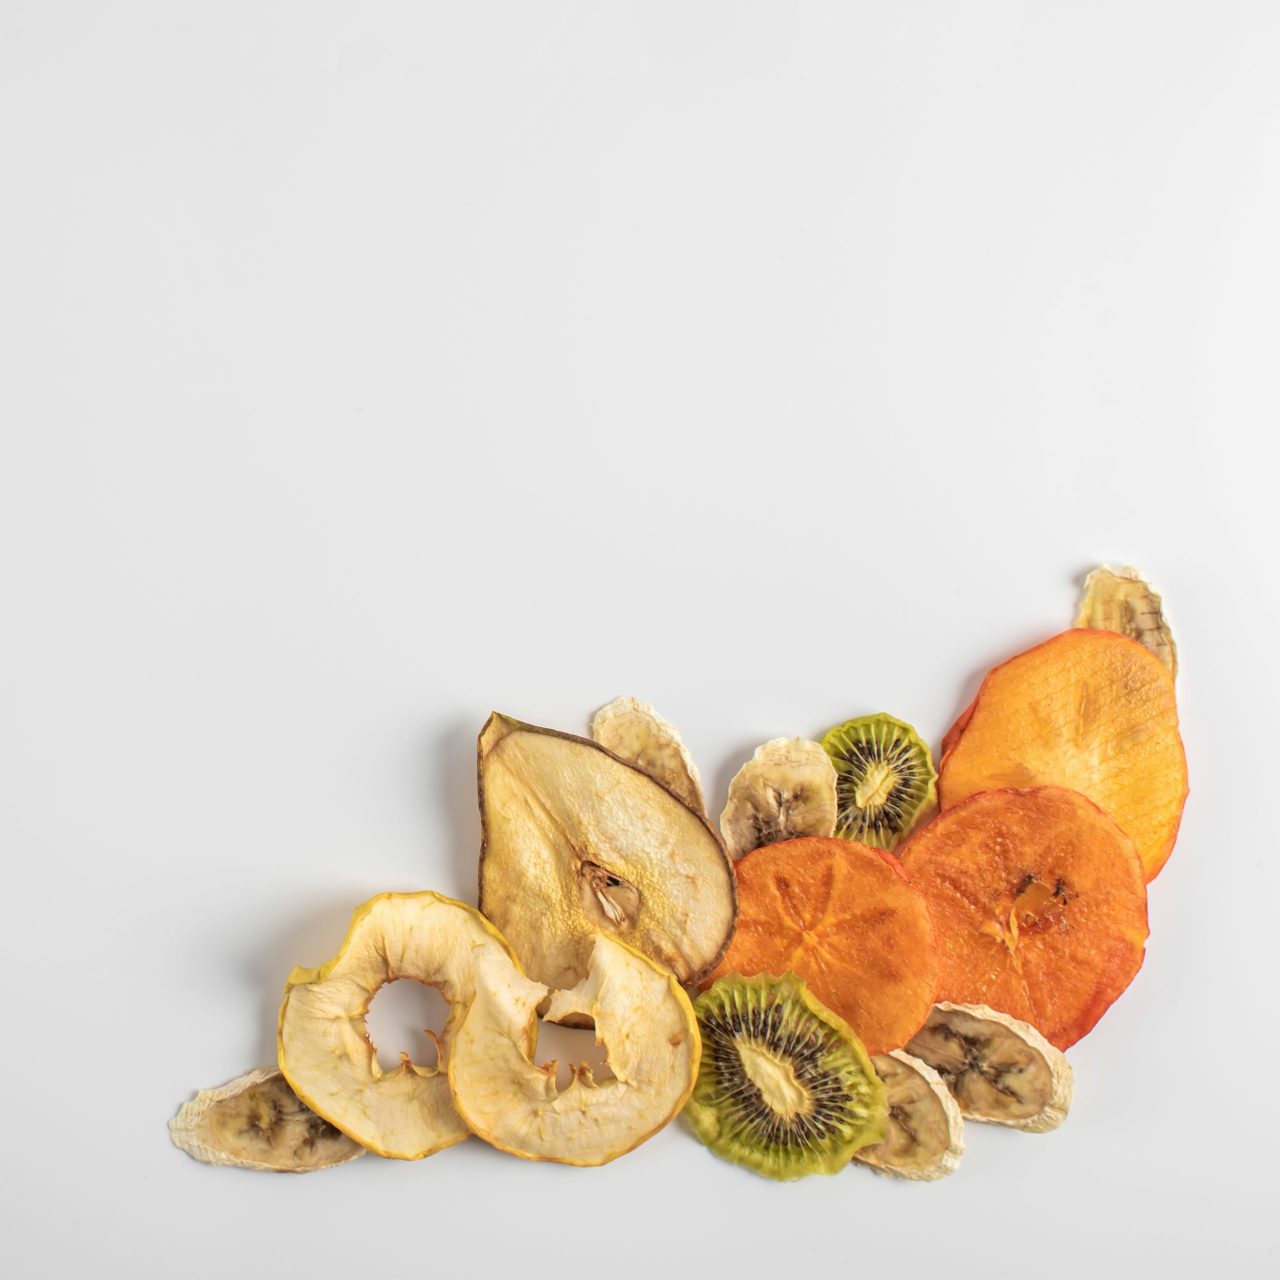 dehydrated-fruits-on-a-light-background-2021-08-30-22-38-18-utc-scaled-1280x1280.jpg